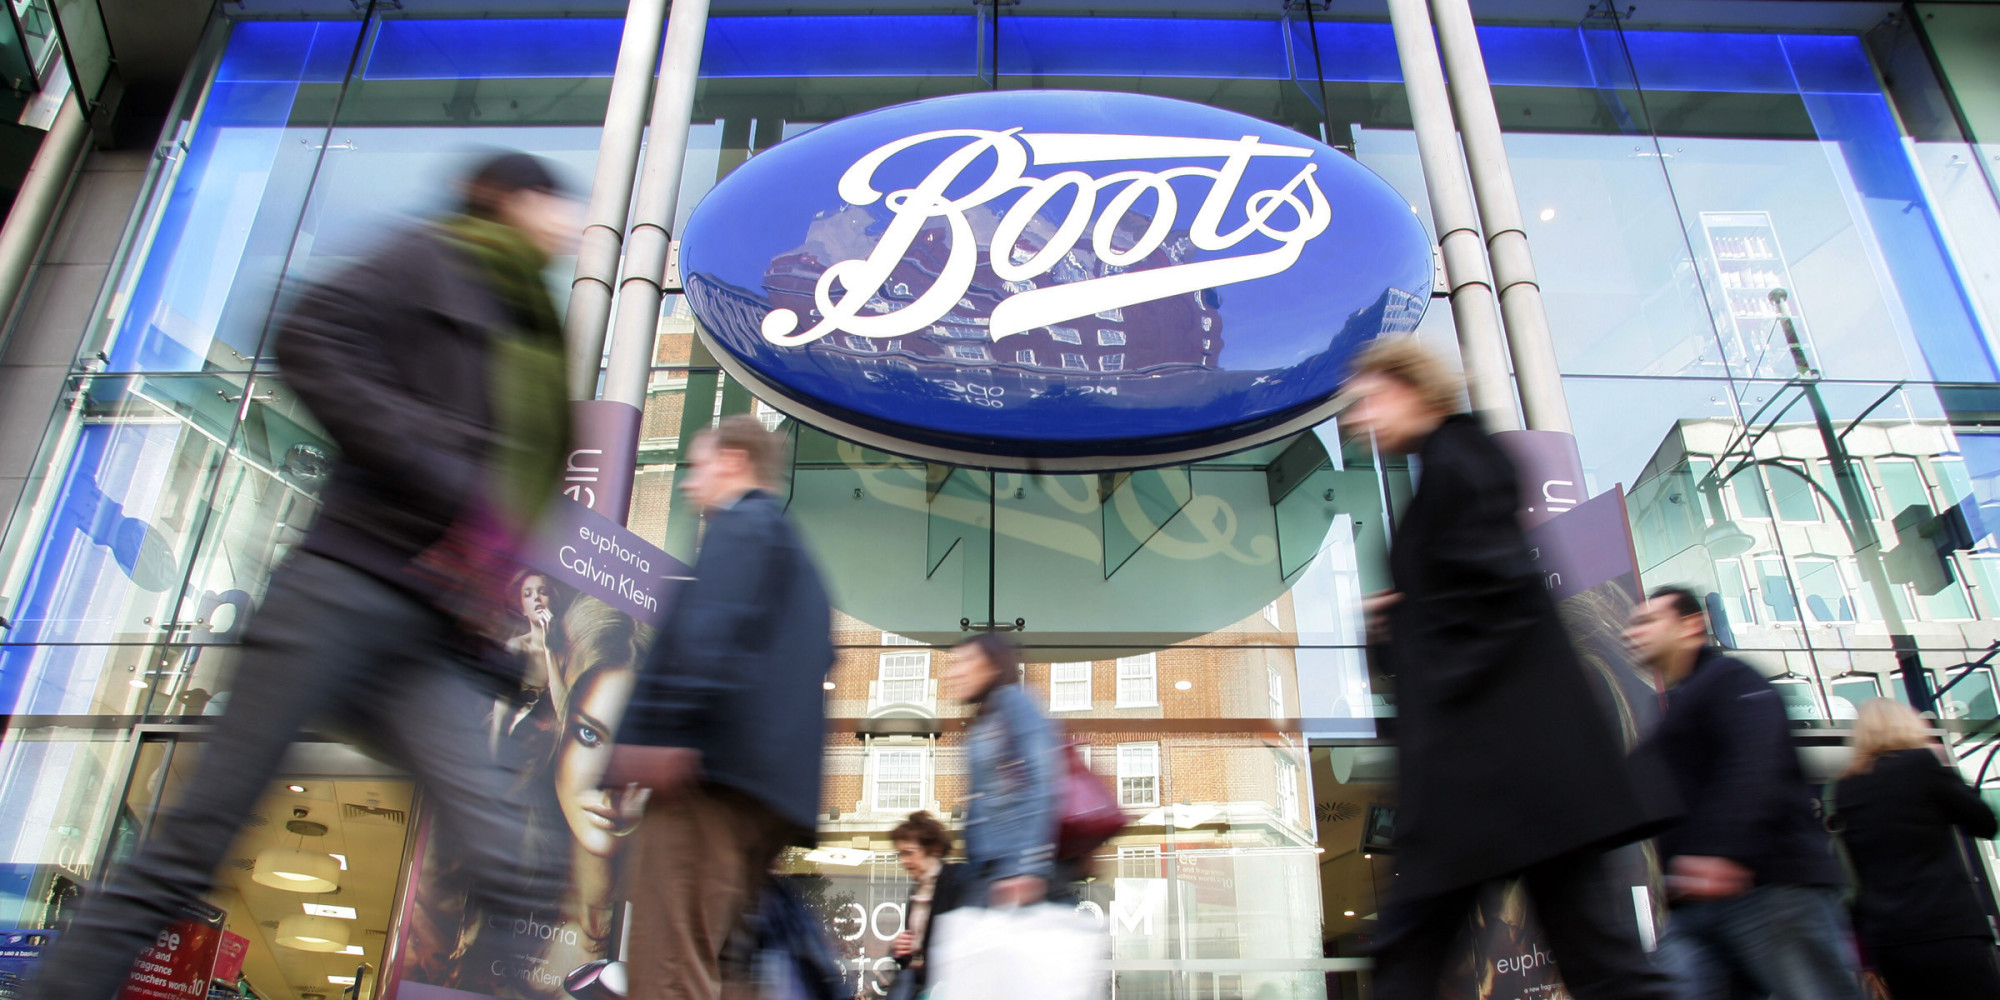 Do Boots really need to "review the sexist pricing of everyday products"?